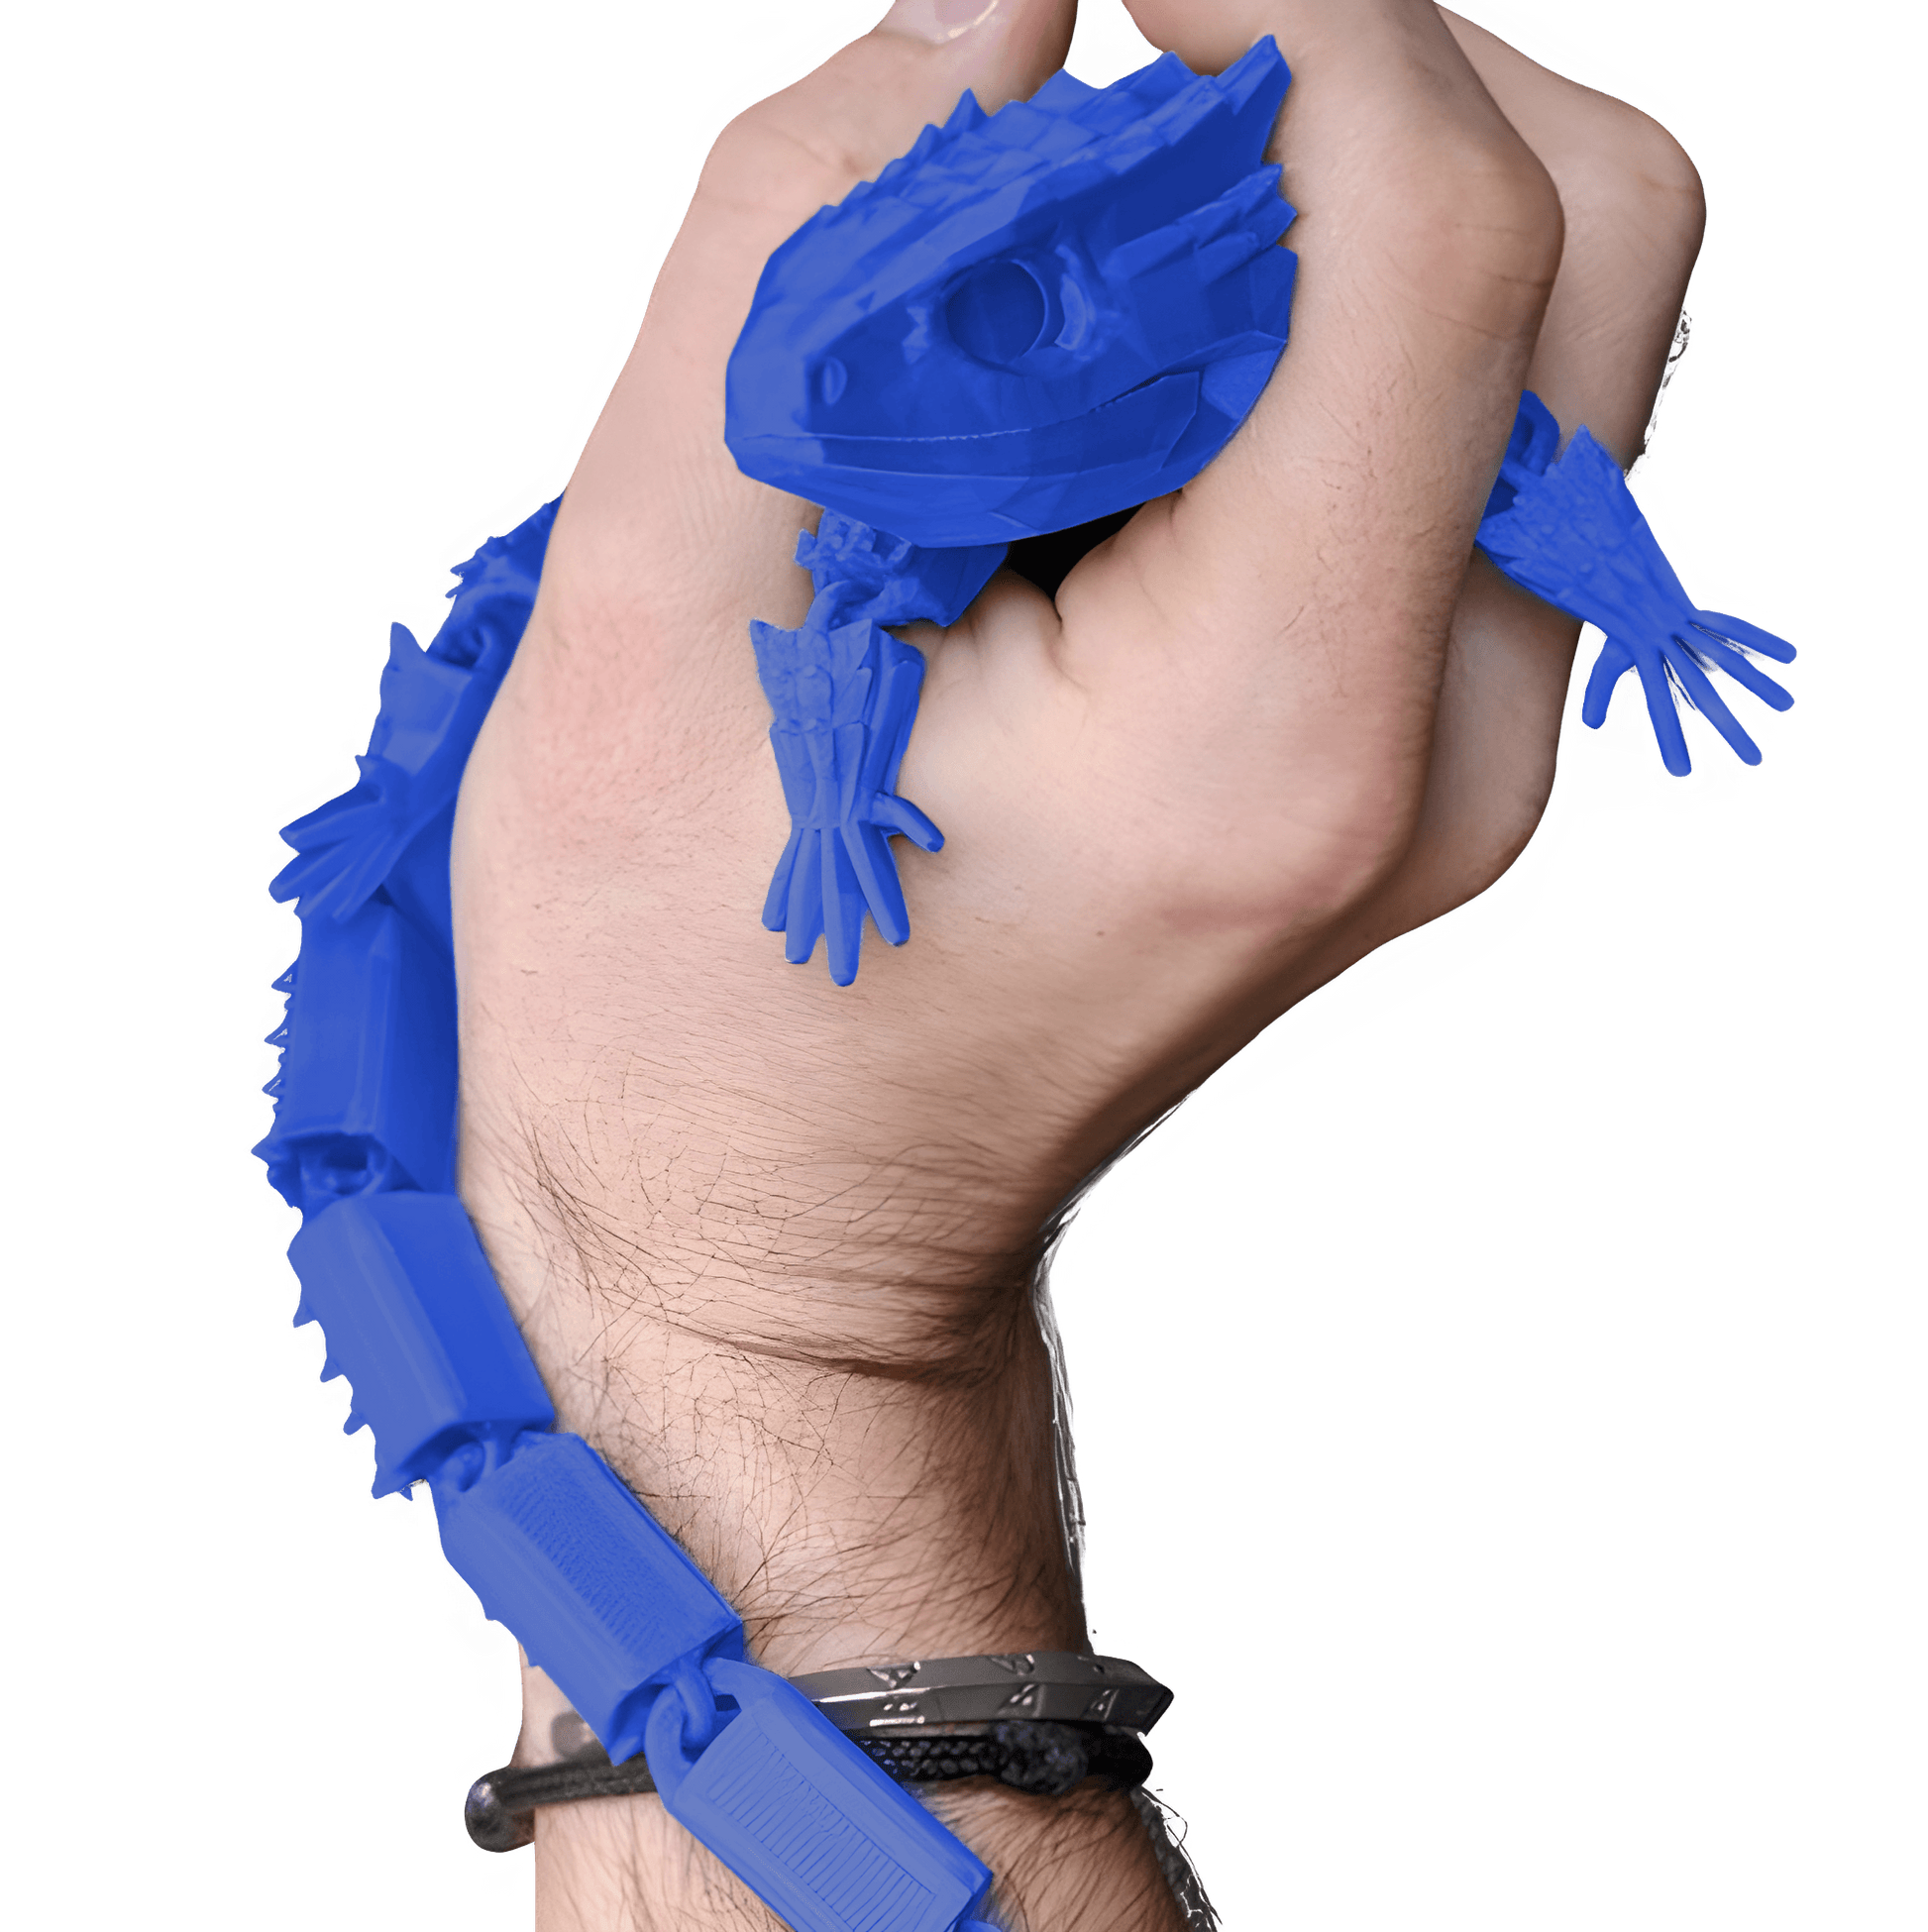 Reptilian Relaxation: 12" Large Lizard Fidget Toy for ADHD Stress Relief - RJW Design Store